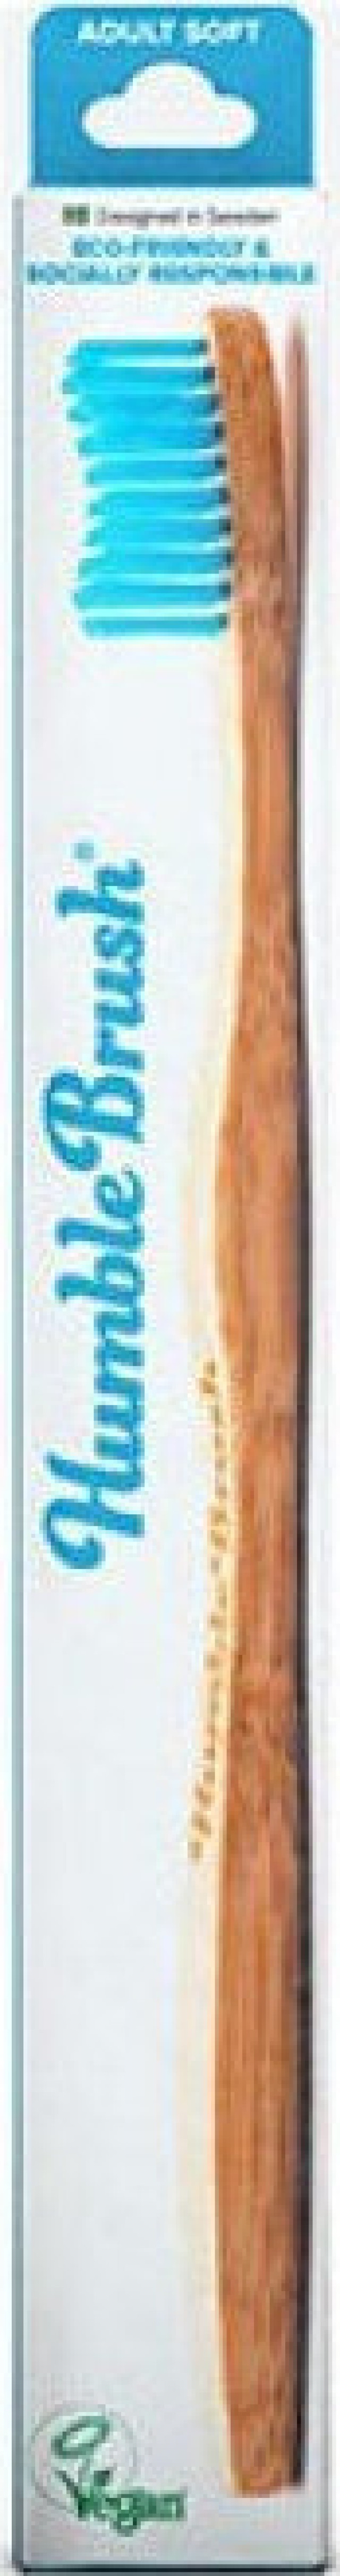 The Humble Co. Toothbrush Bamboo Blue Μπλε Οδοντόβουρτσα Απο Μπαμπού Adult Soft 1 τμχ product photo